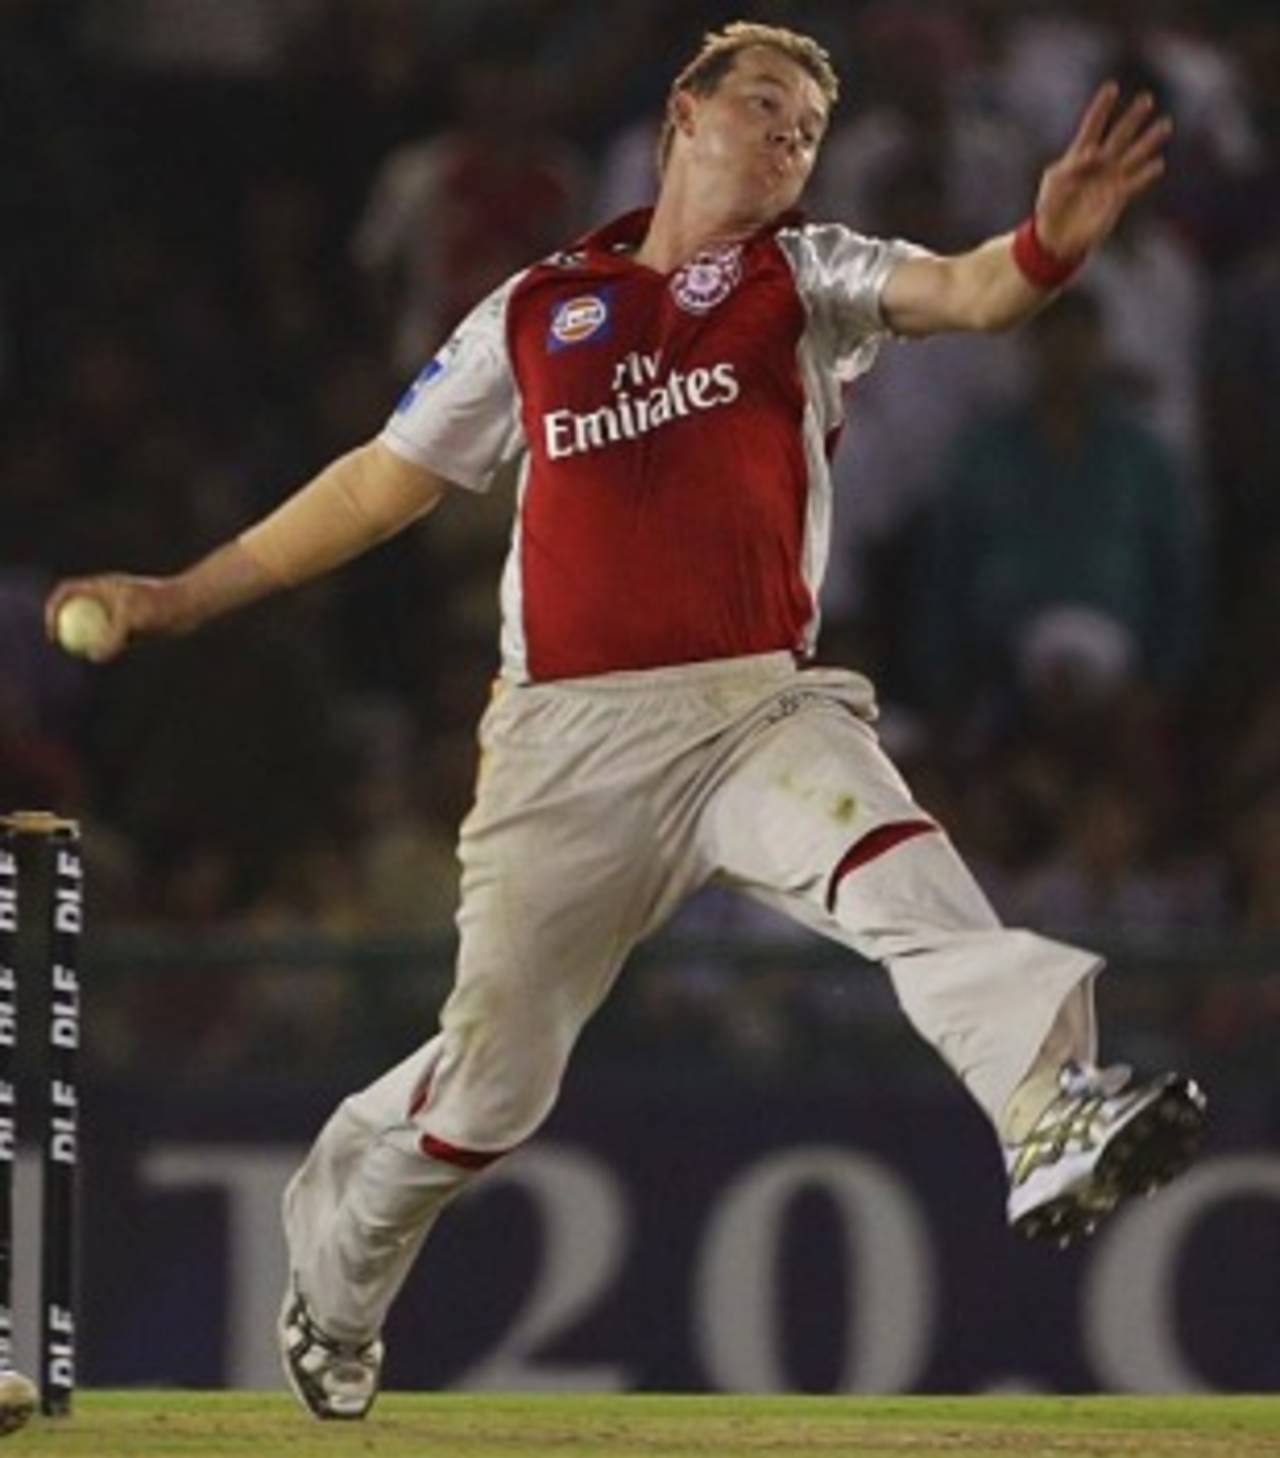 Brett Lee returned briefly for the IPL this year before his early exit due to a broken thumb&nbsp;&nbsp;&bull;&nbsp;&nbsp;Indian Premier League